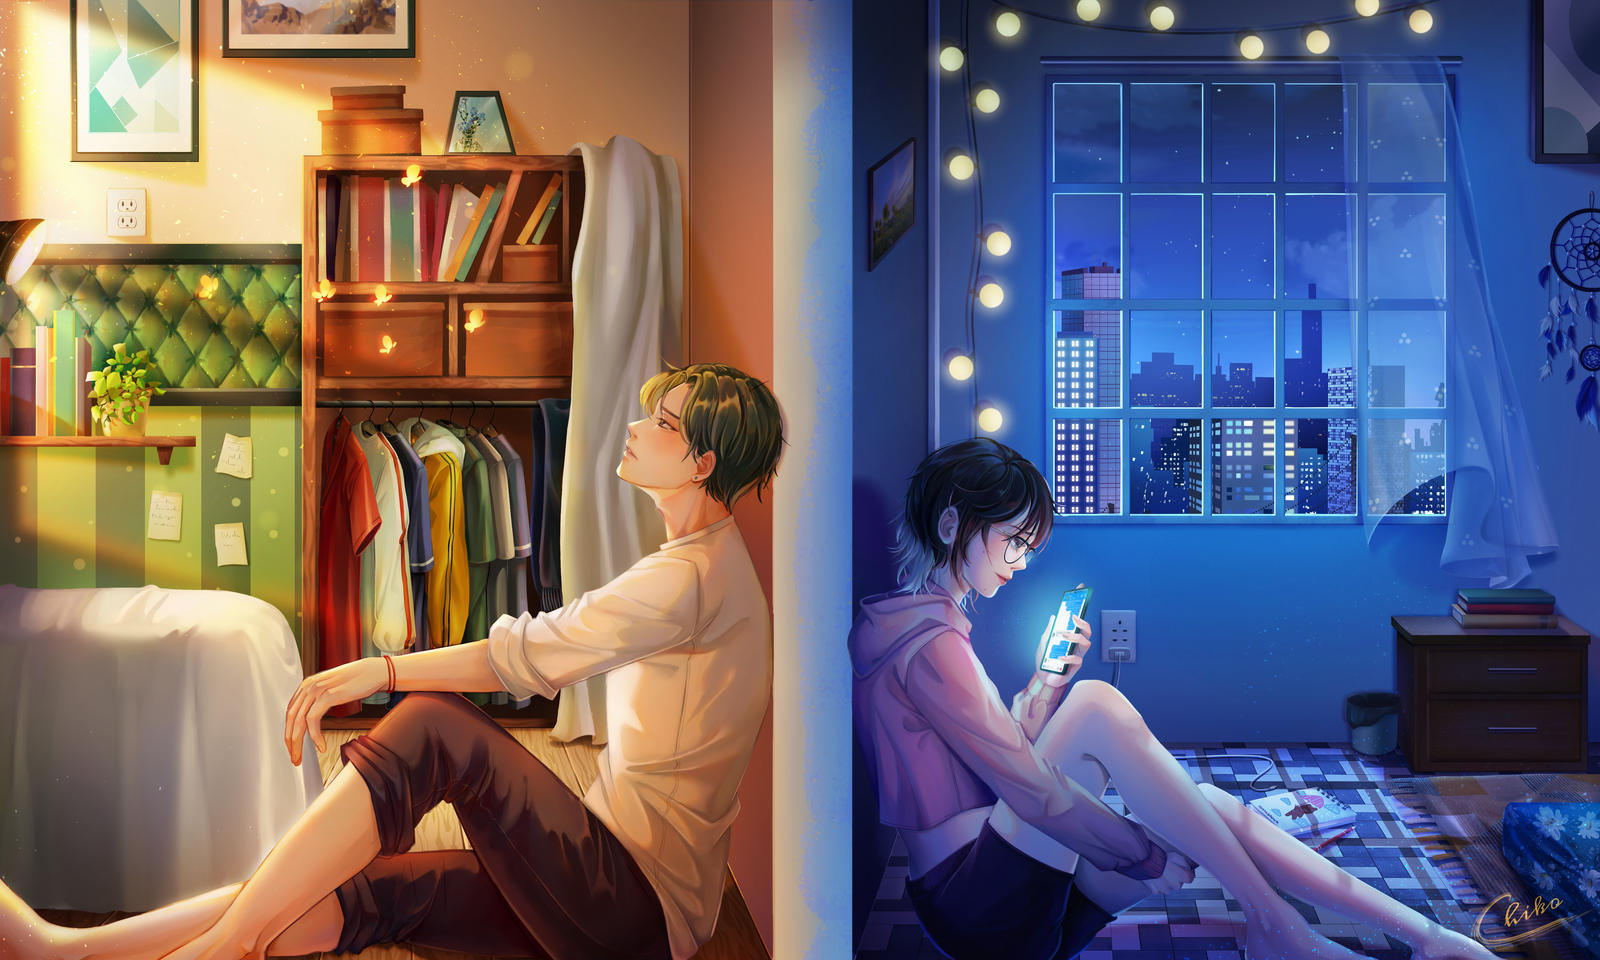 Long Distance Relationship by MaiChiko on DeviantArt